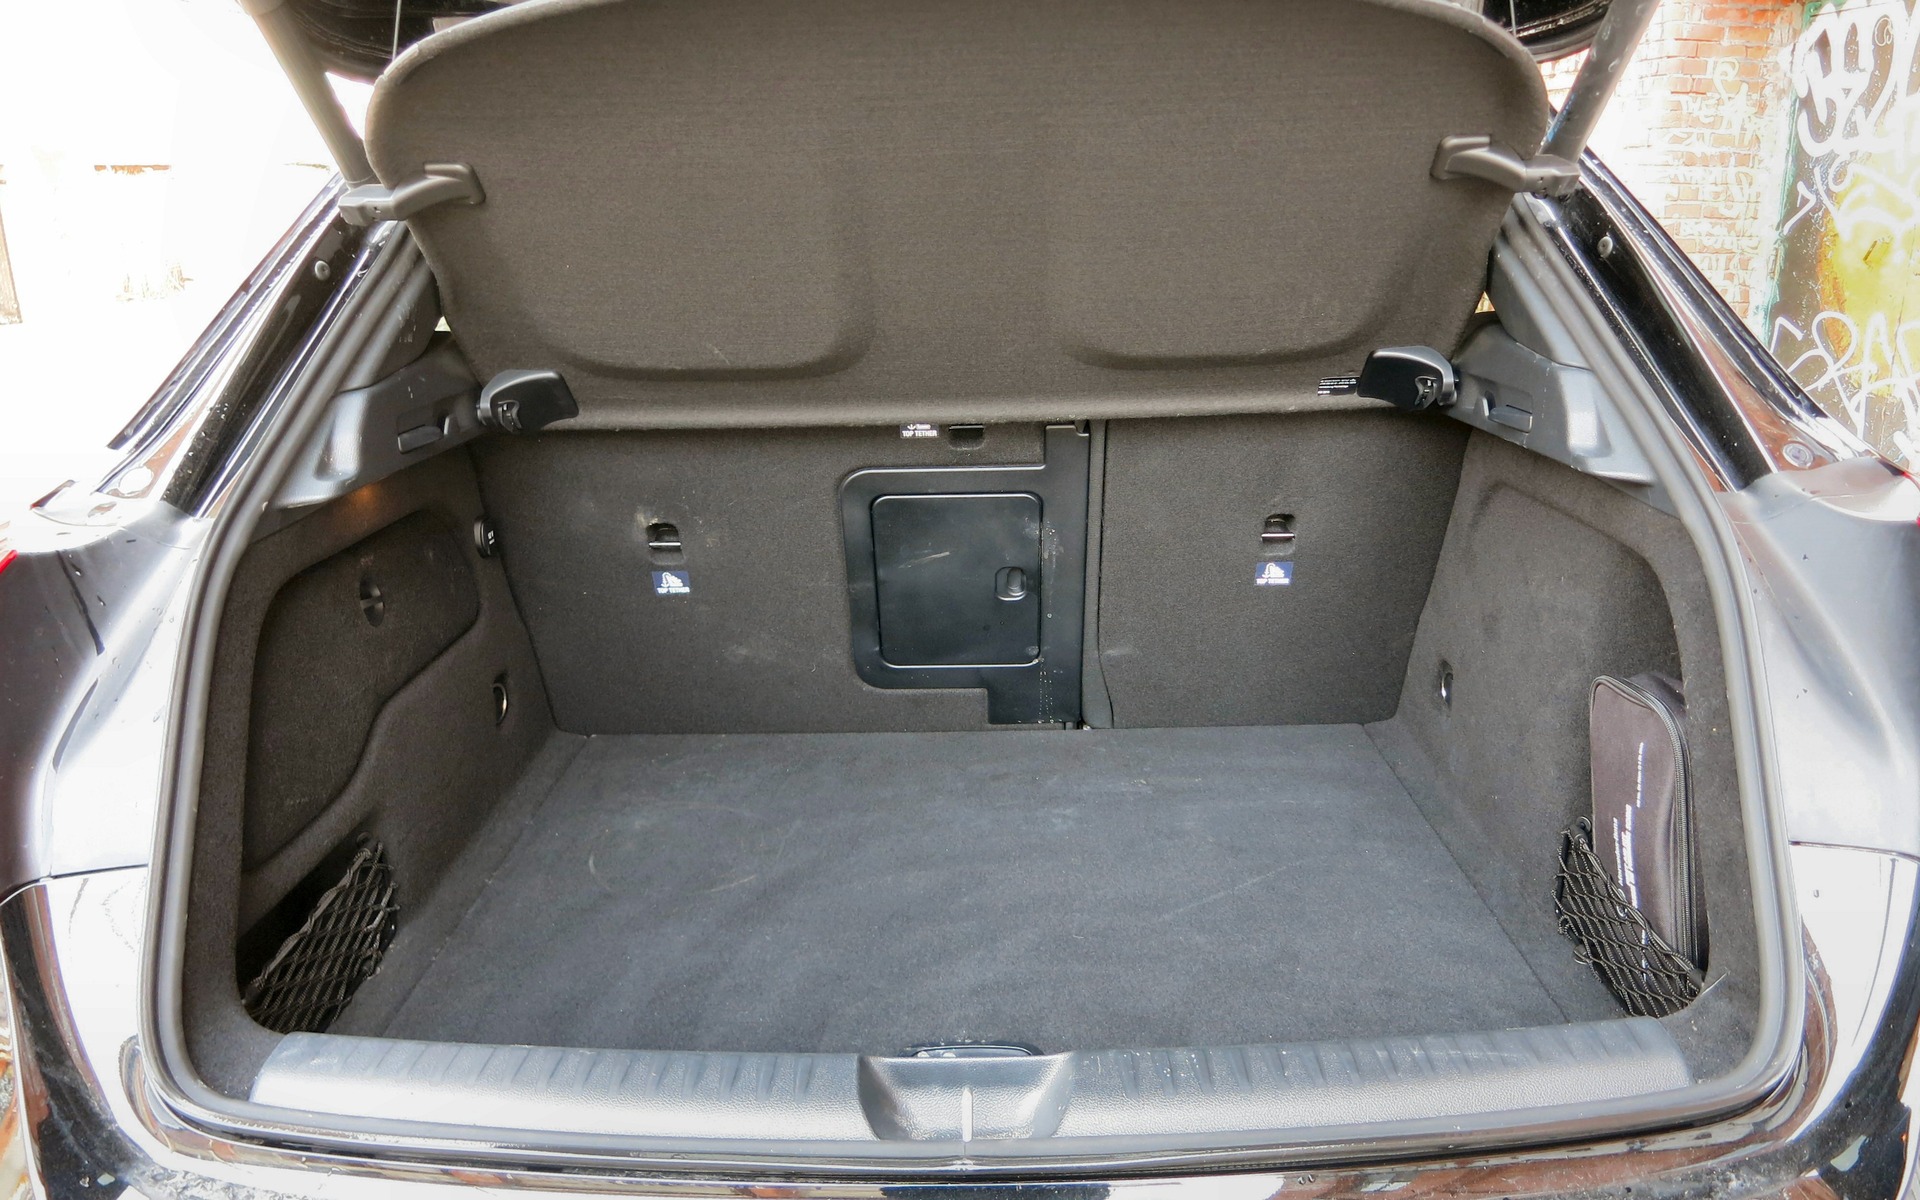 Cargo space is brief compared to other compact and subcompact crossovers.